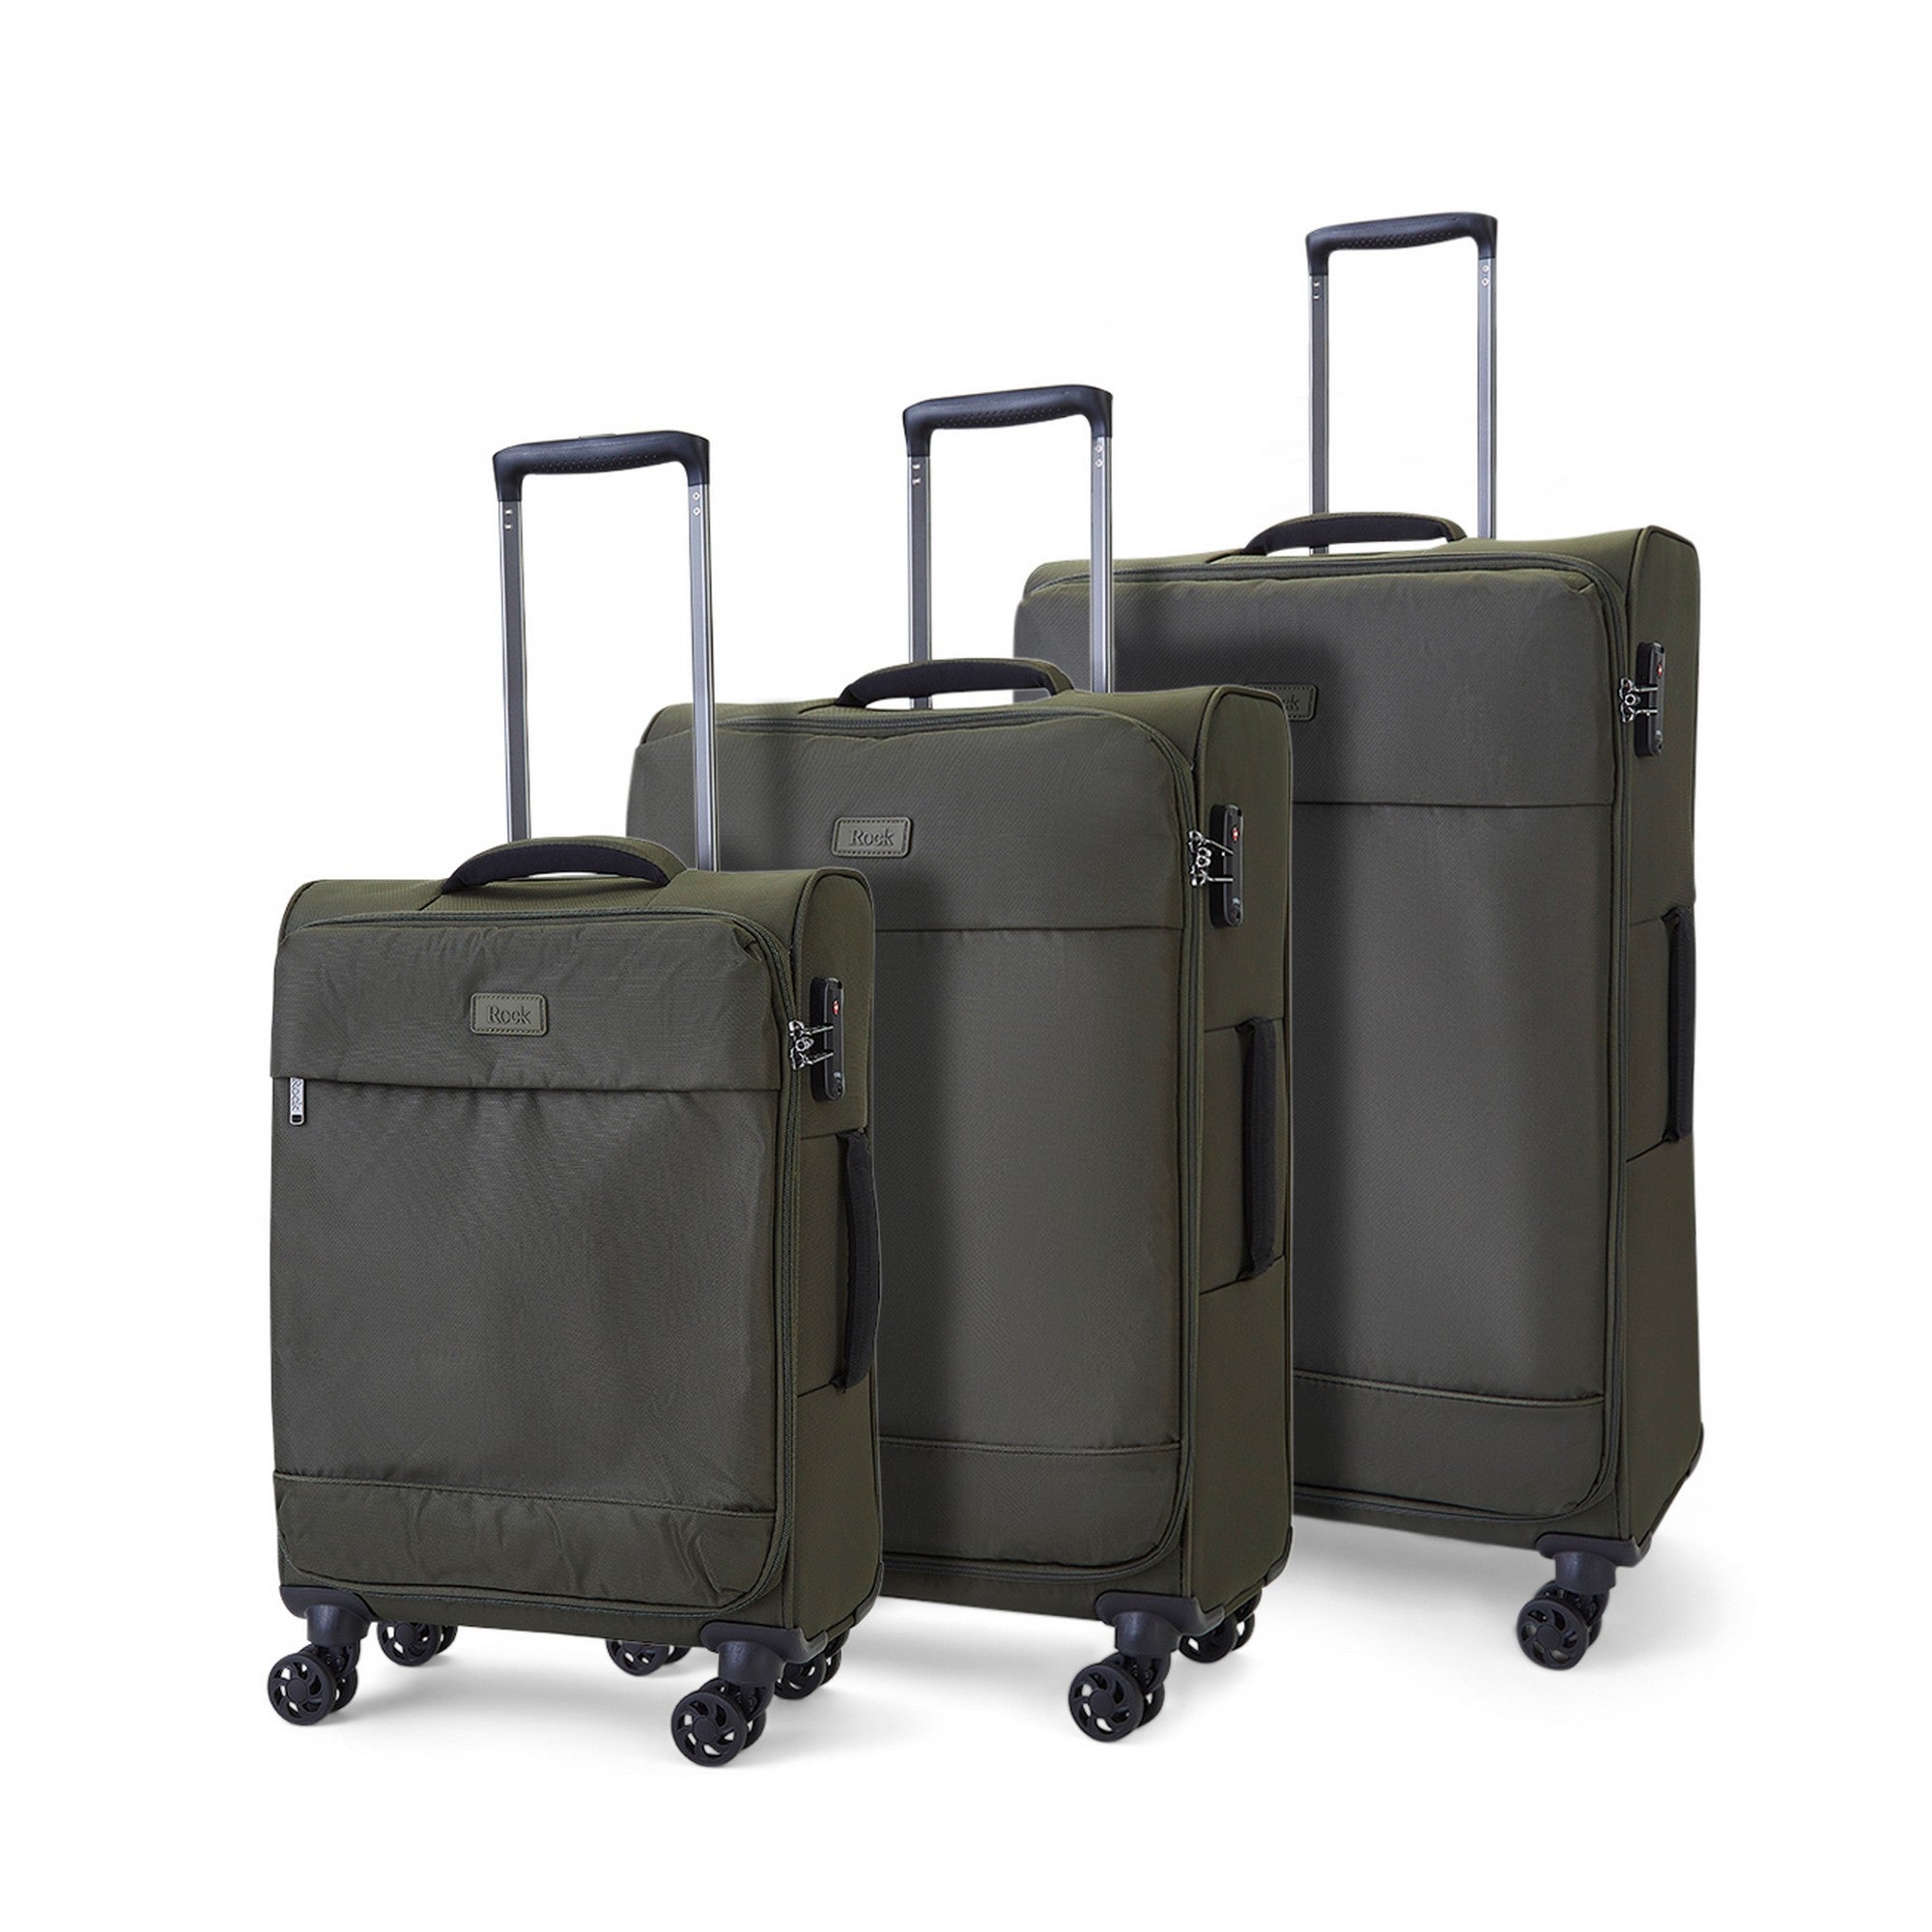 Set of 3 Rock Luggage Paris Soft Shell Suitcases